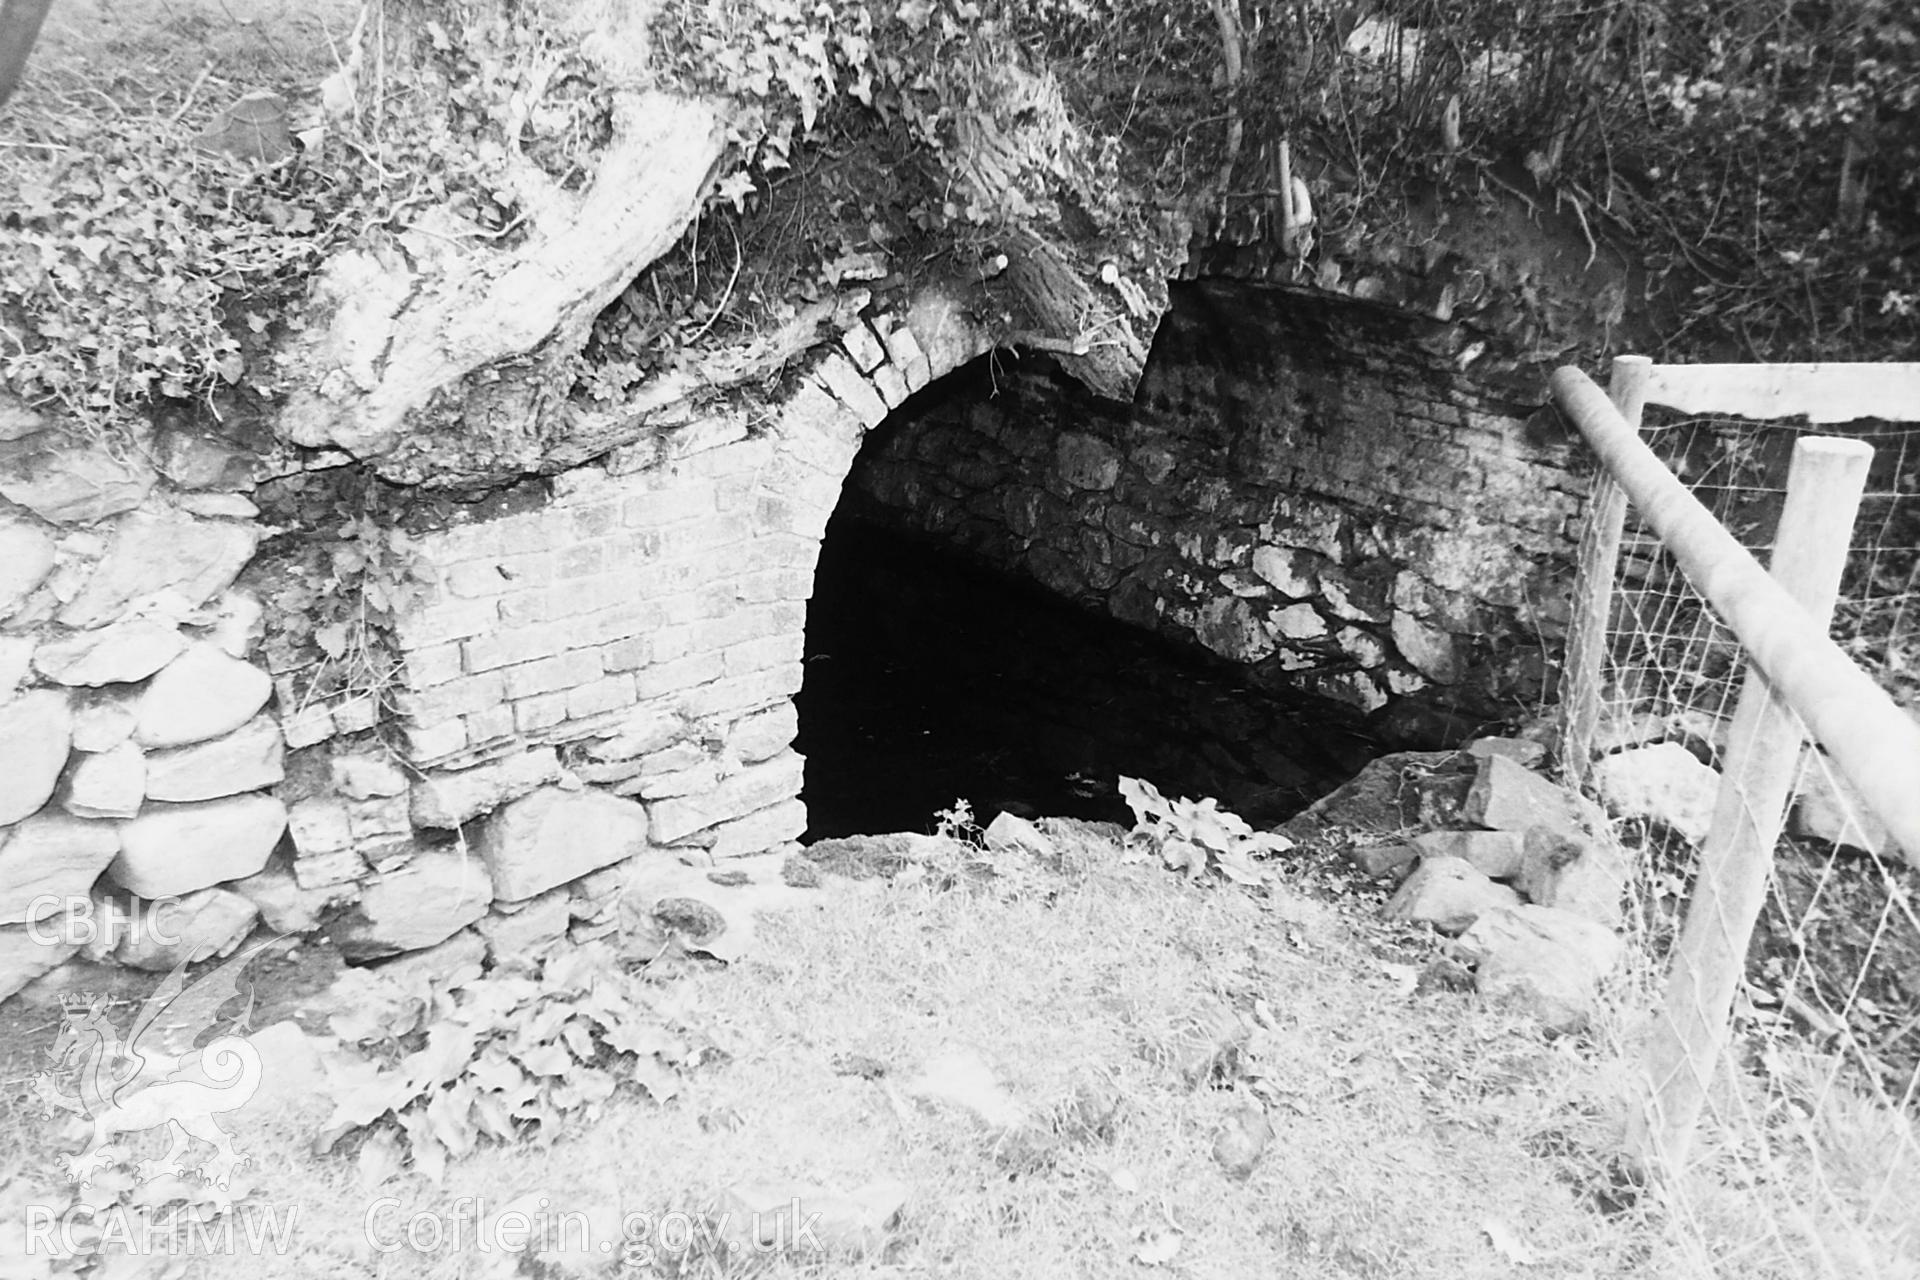 Black and white photo showing St Cynhafal's Well, taken by Paul R. Davis, undated.